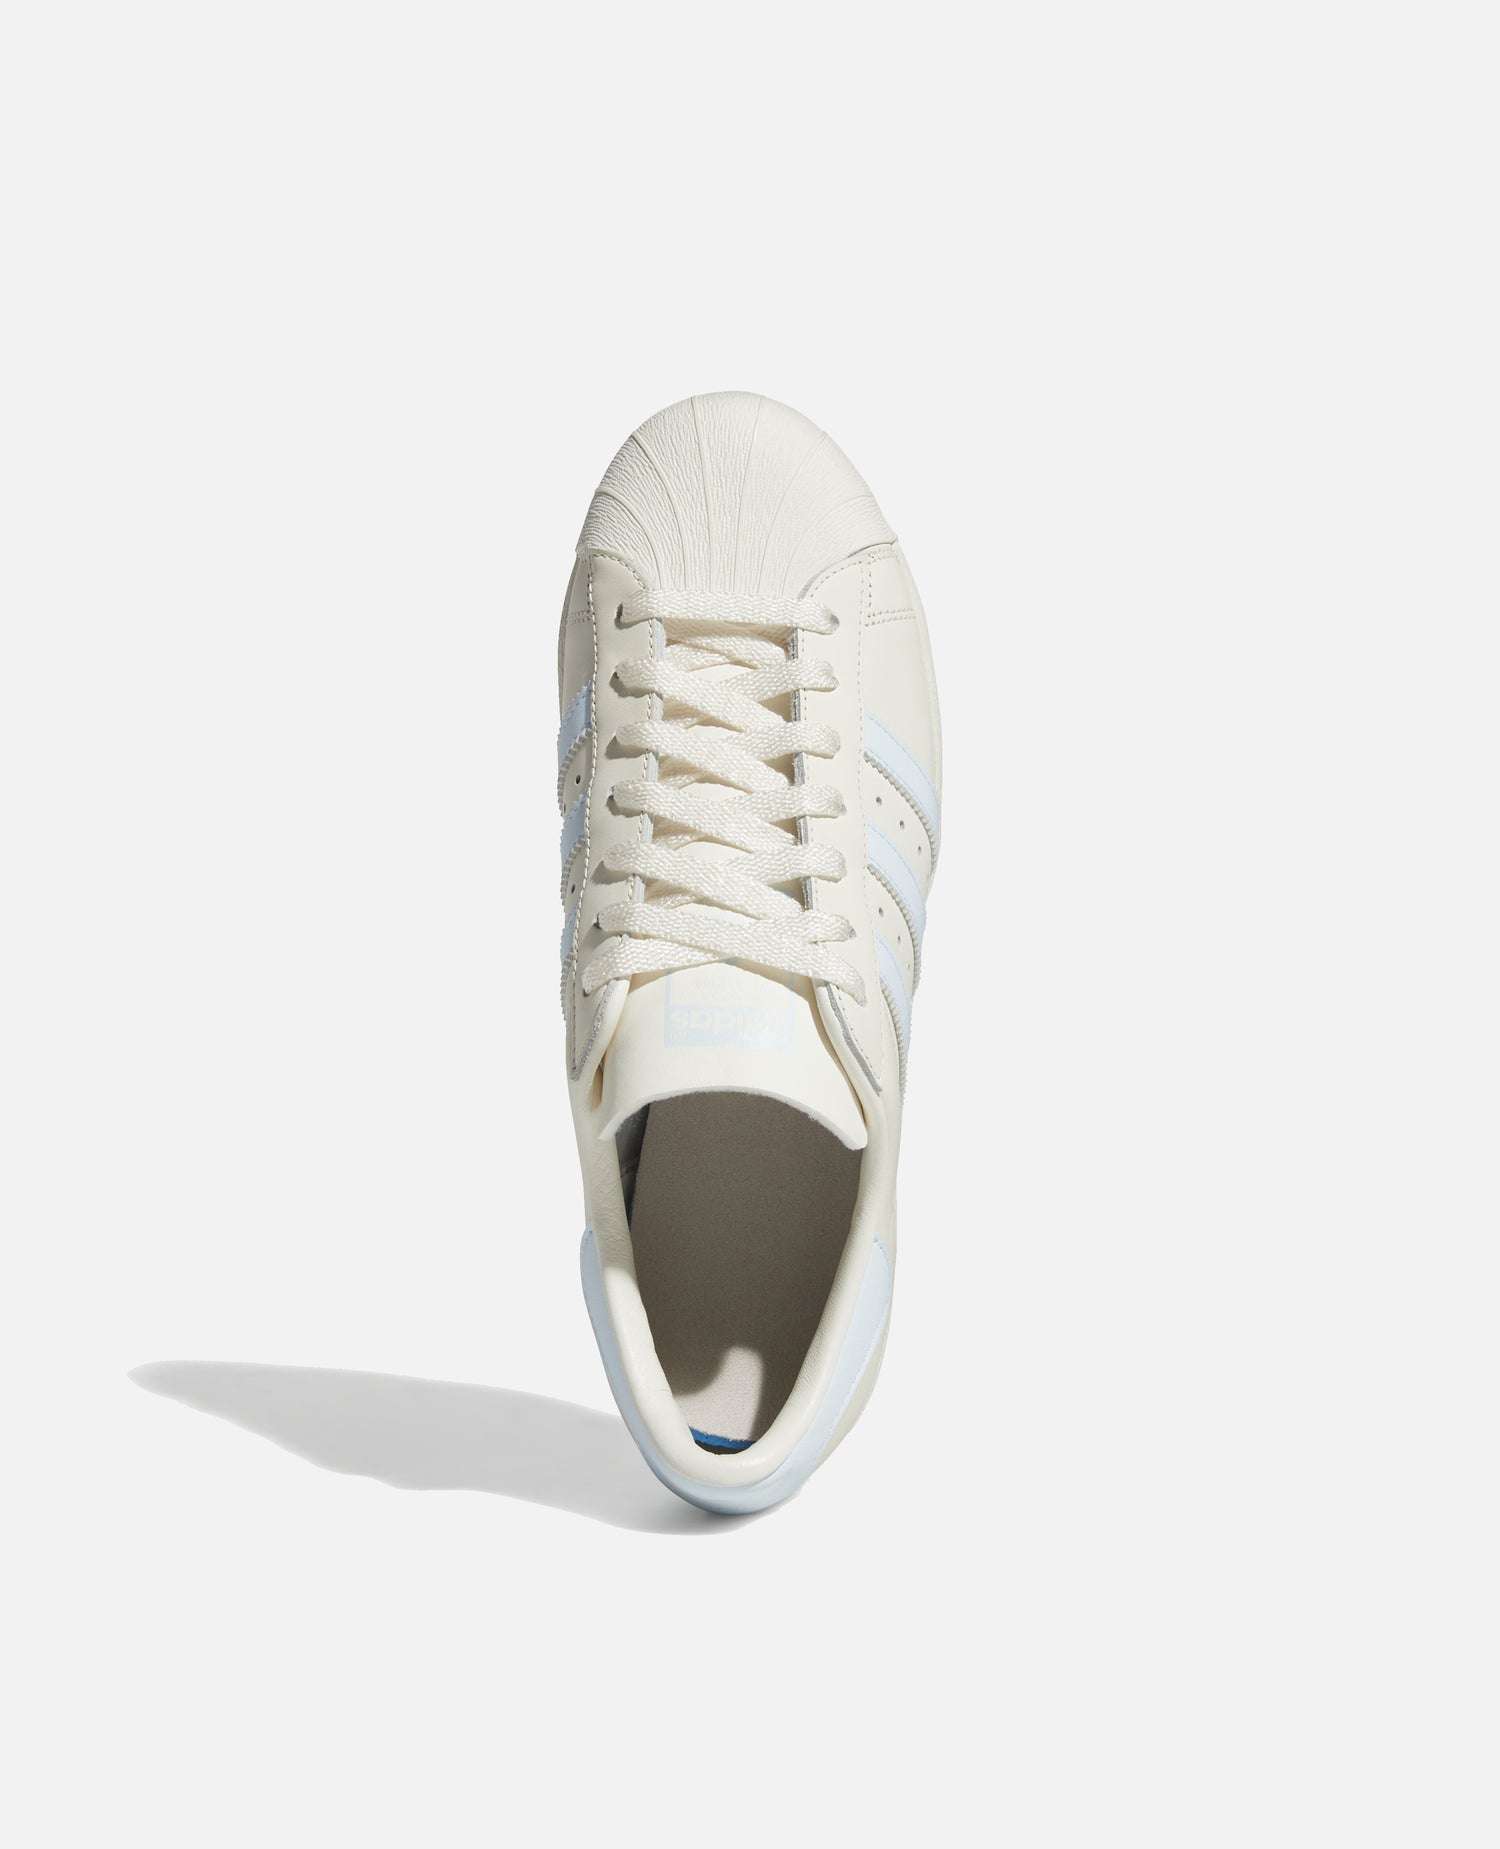 Adidas Superstar 82 (Cloud White/Sky Tint/Off White)